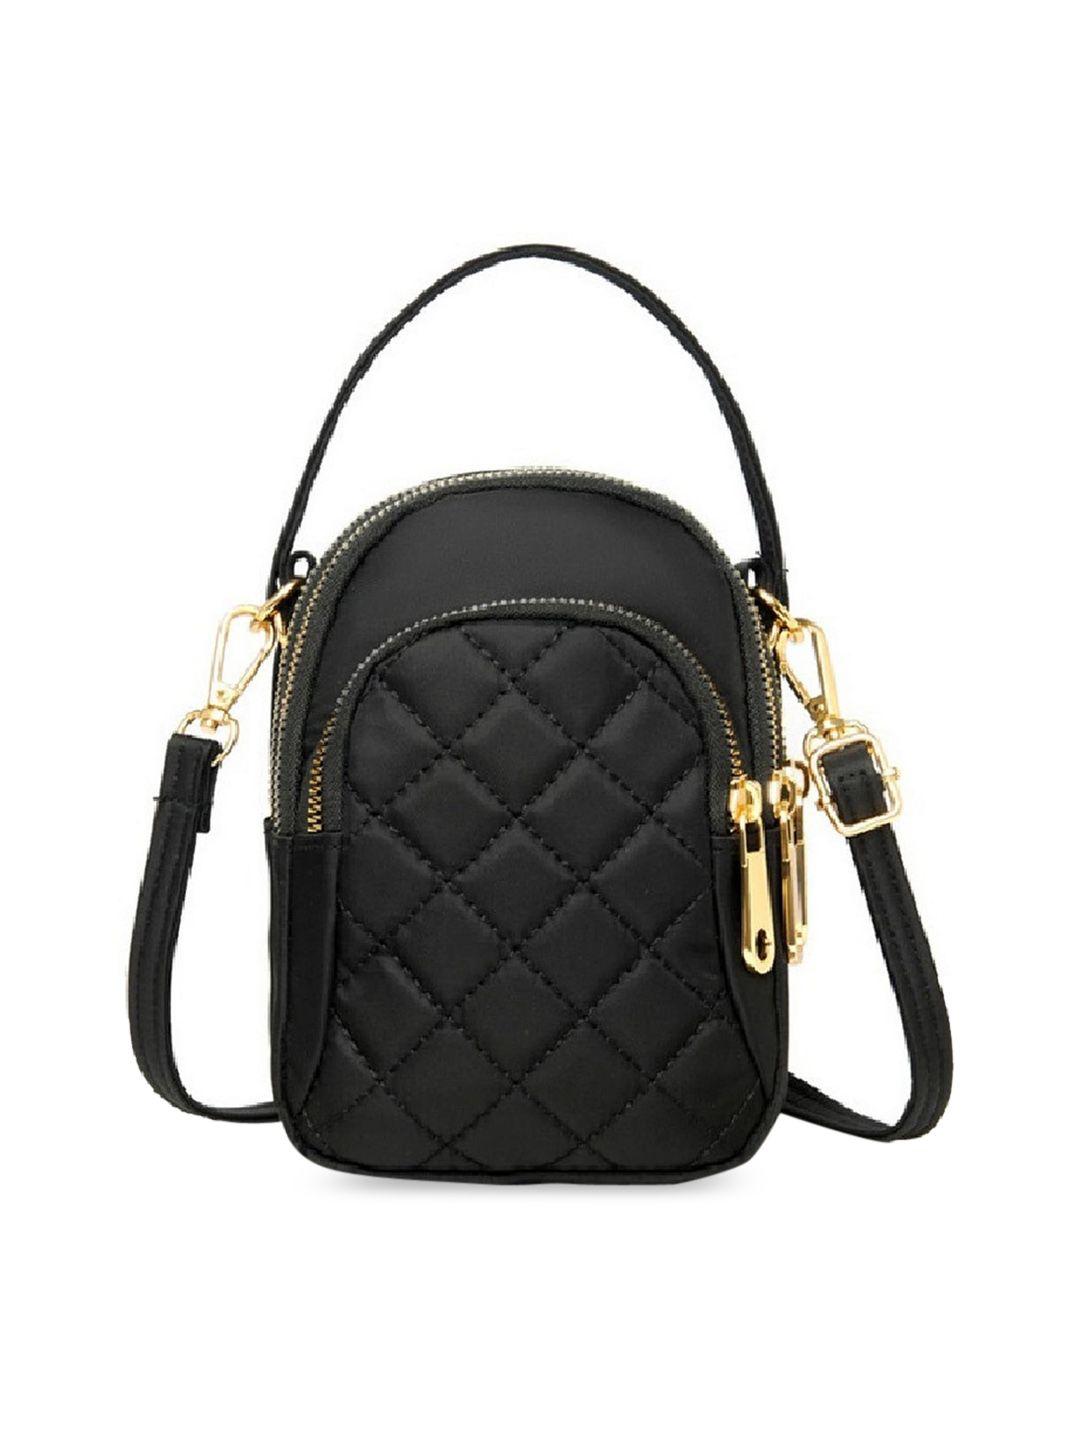 diva dale black structured sling bag with quilted